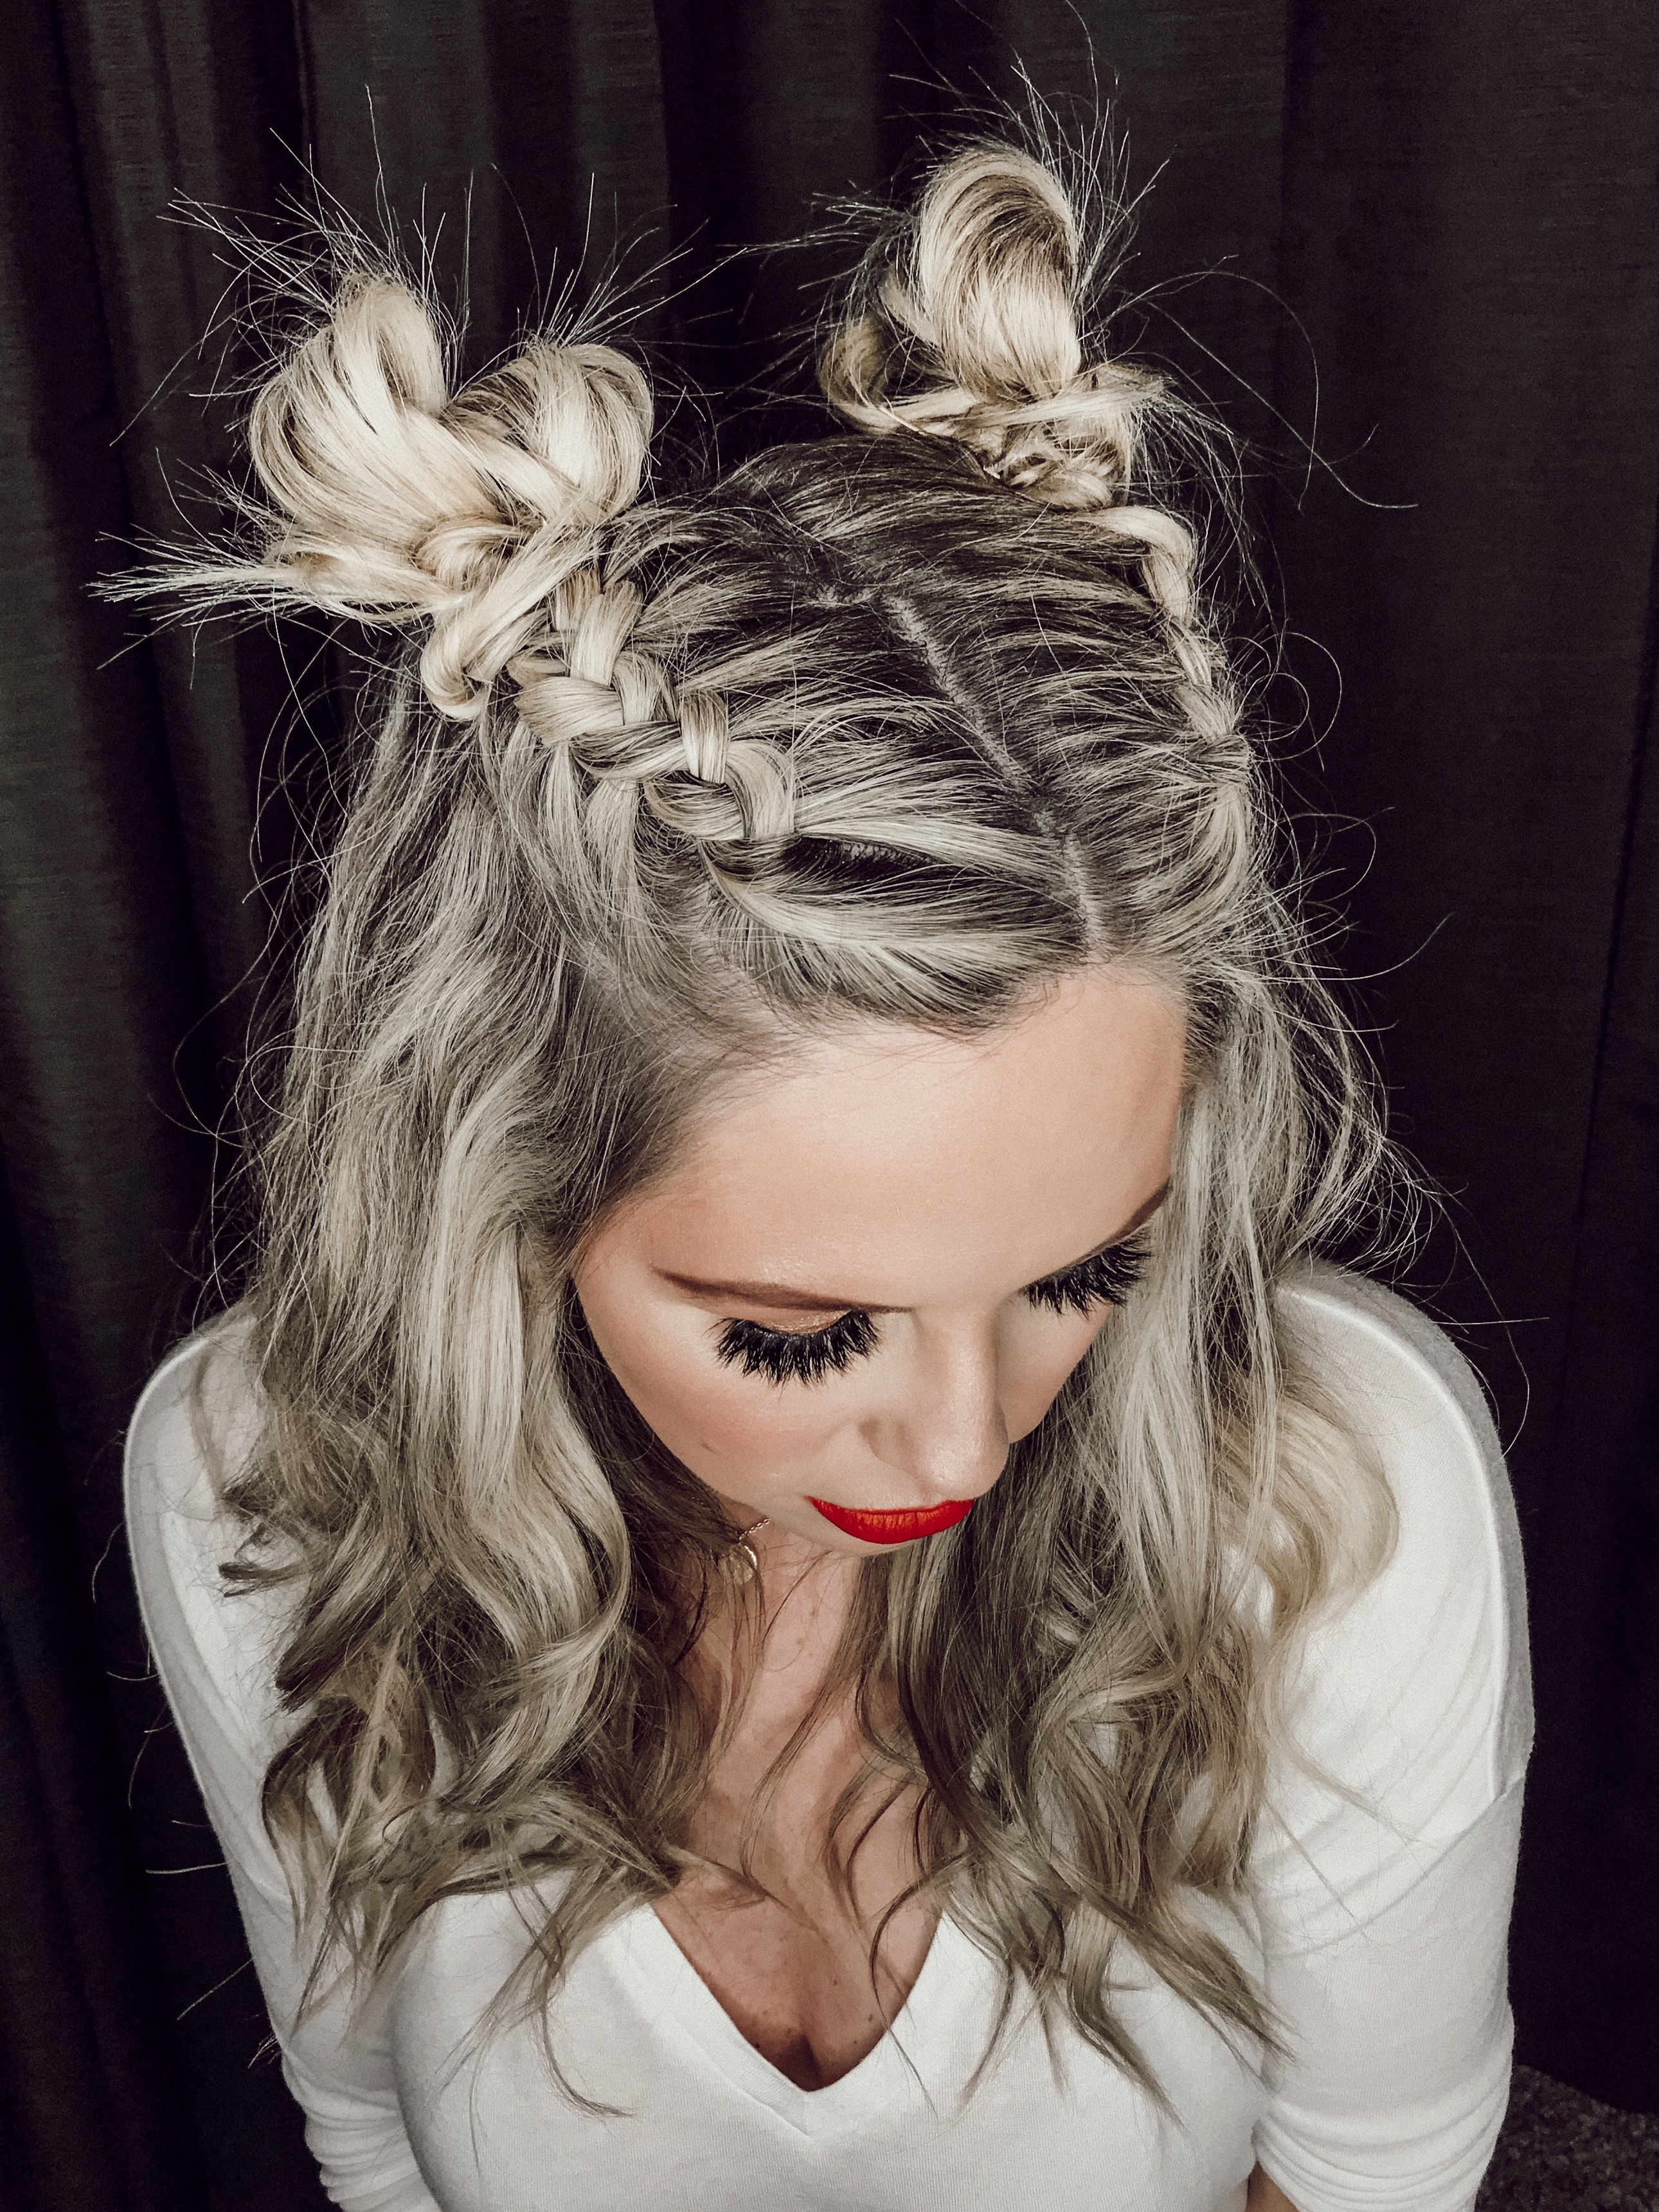 New Years Eve Style Guide featured by top Nashville life and style blog, Nashville Wifestyles. Your Complete New Years Eve Style Guide: Hair, Makeup, Outfits & Party Ideas - Nashville Wifestyles; I’m loving these double dutch pigtail braids buns by my friend Courtney. It’s so fun and versatile that you can rock it during the holidays or two days long like I did even to run errands ha. She’s giving a step by step on my YouTube channel for you. with New Years comes more makeup looks, parties and recipes. NYE is the ideal time to be as EXTRA as you wanna be. Amp up your New Years Eve style and wear the sparkles, wear the red lip and the smoky eye, rock the glitter and big hair.